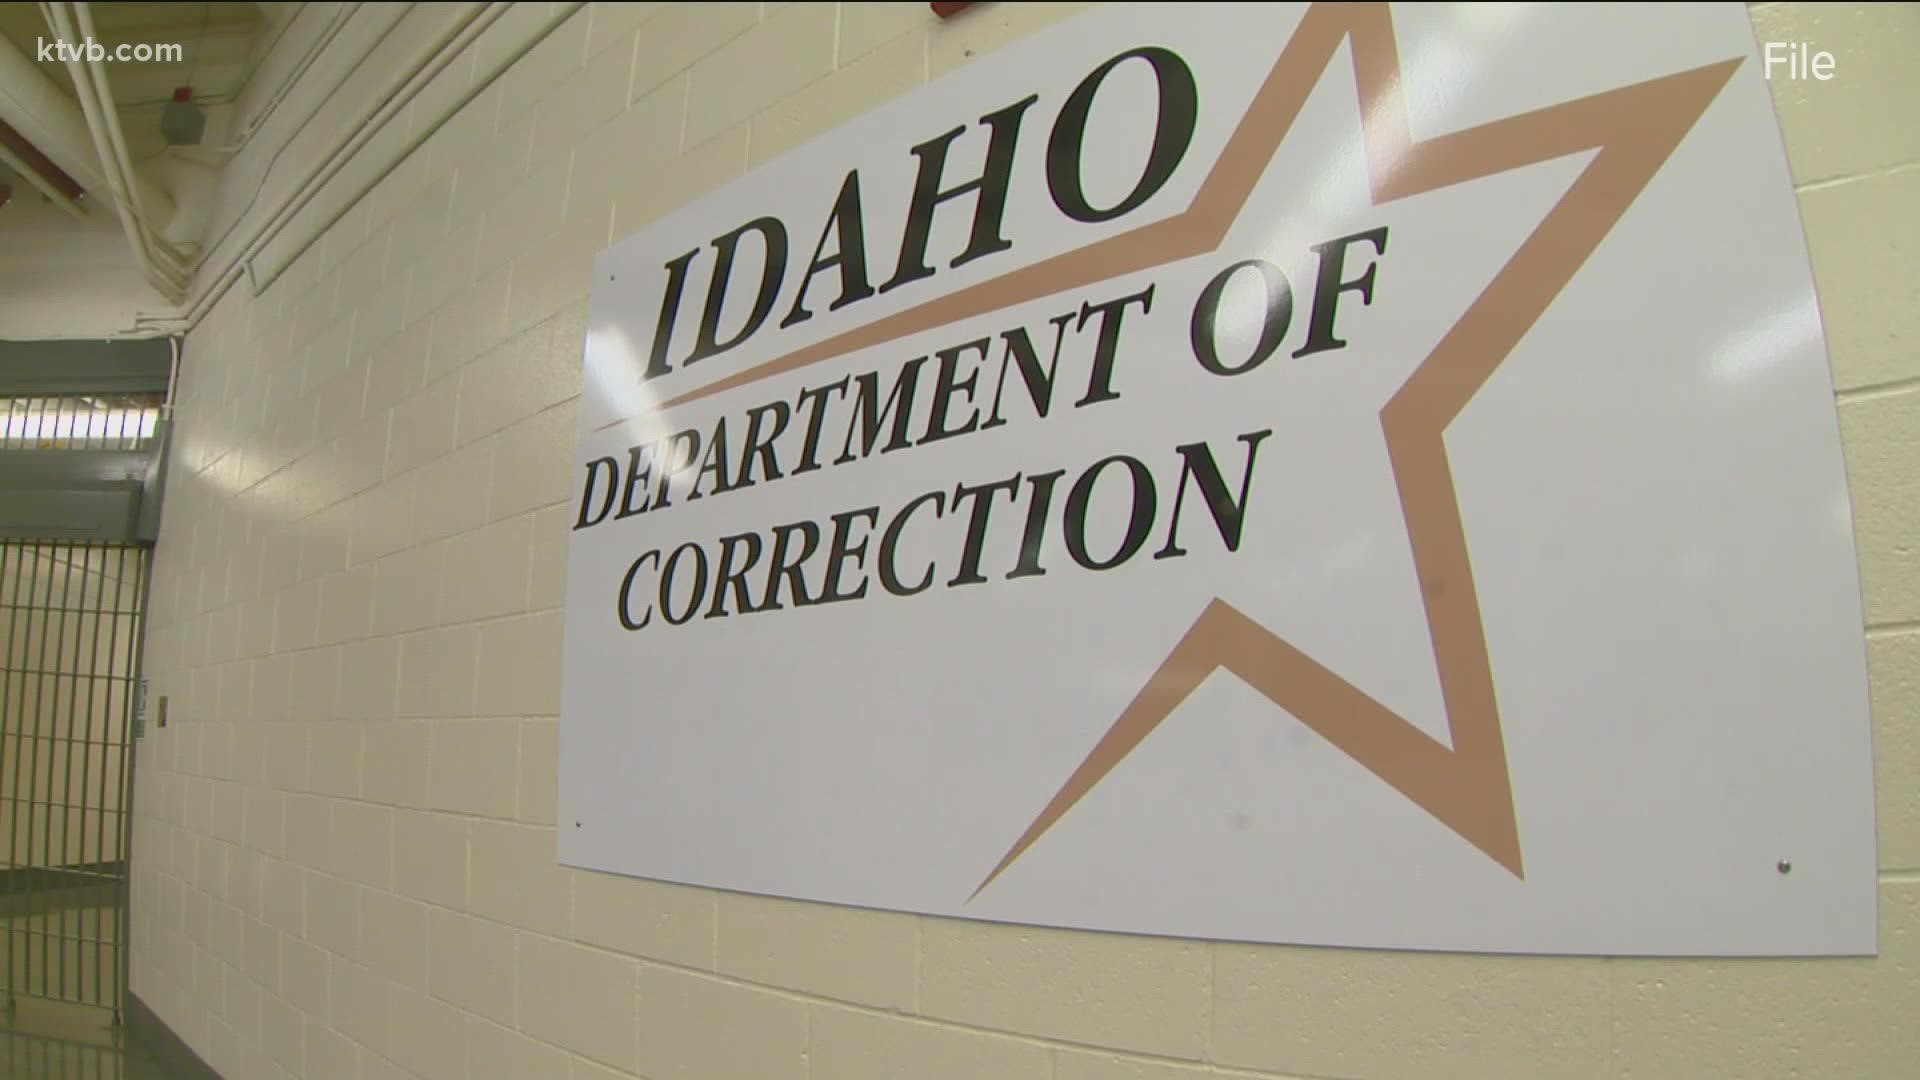 The Idaho Department of Correction says 24% of its correctional officer positions were vacant last month, including 190 vacancies at its prisons in Kuna.